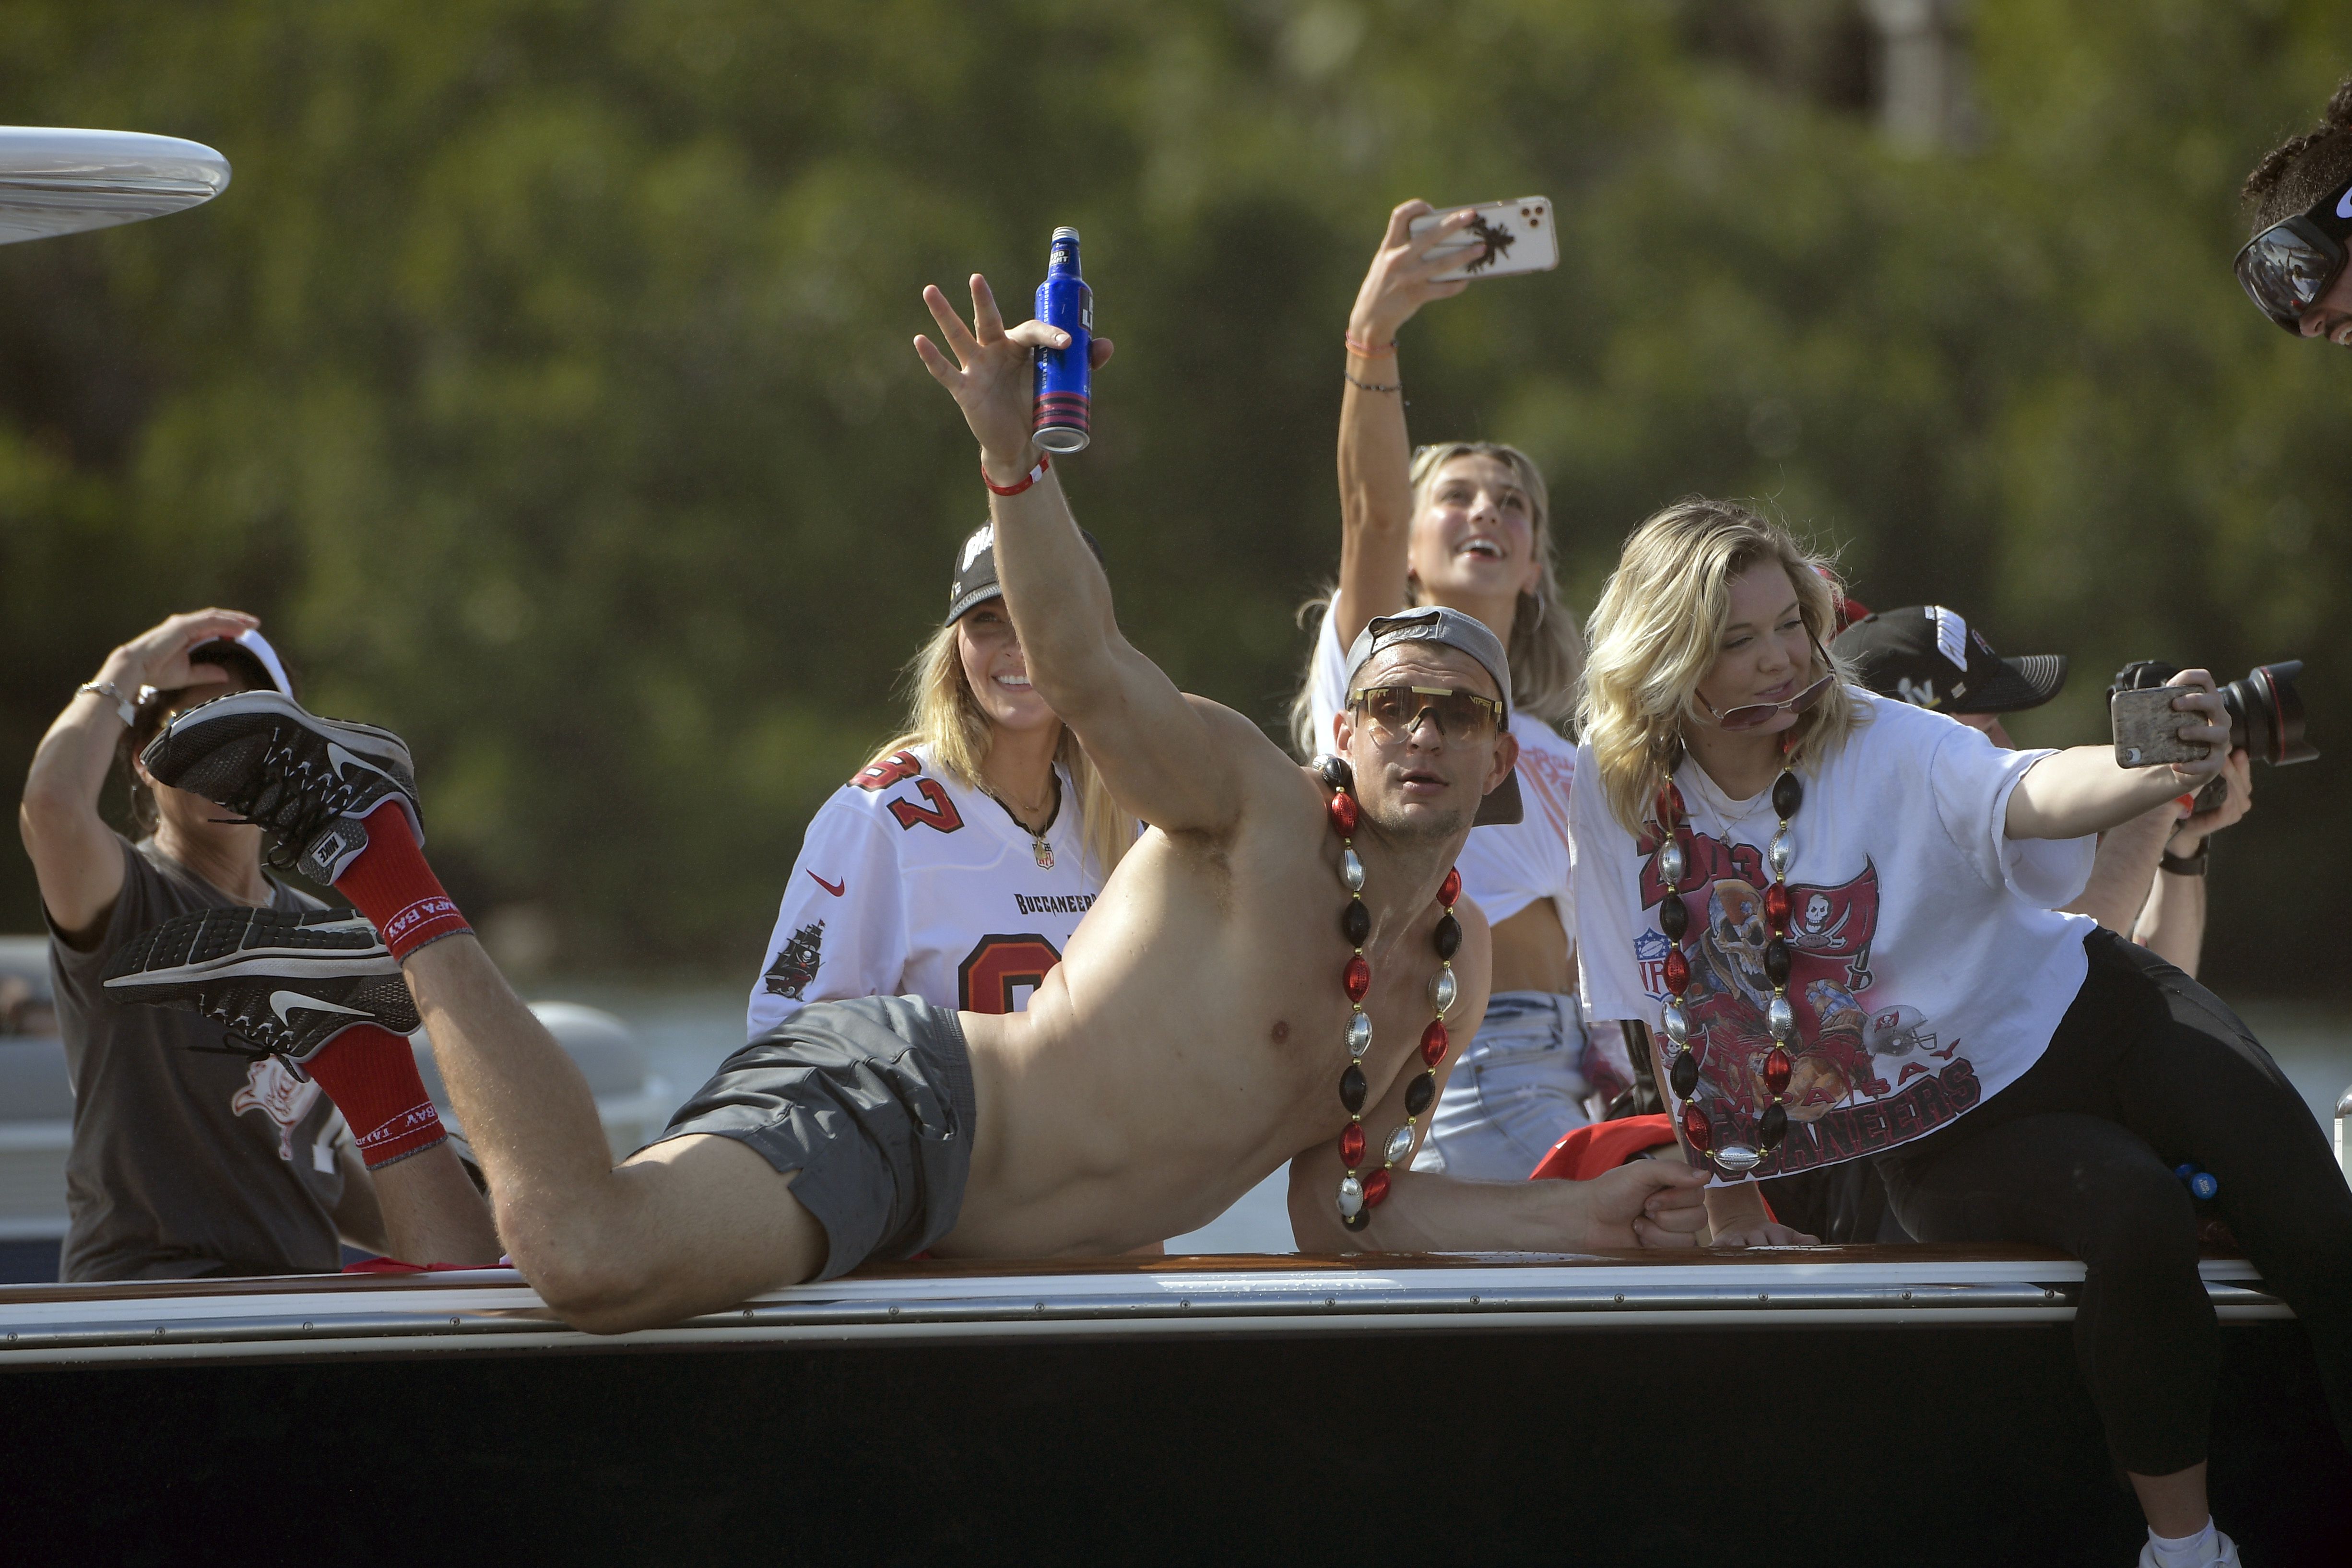 Tom Brady Attends Tampa Super Bowl Parade in $2 Million Boat